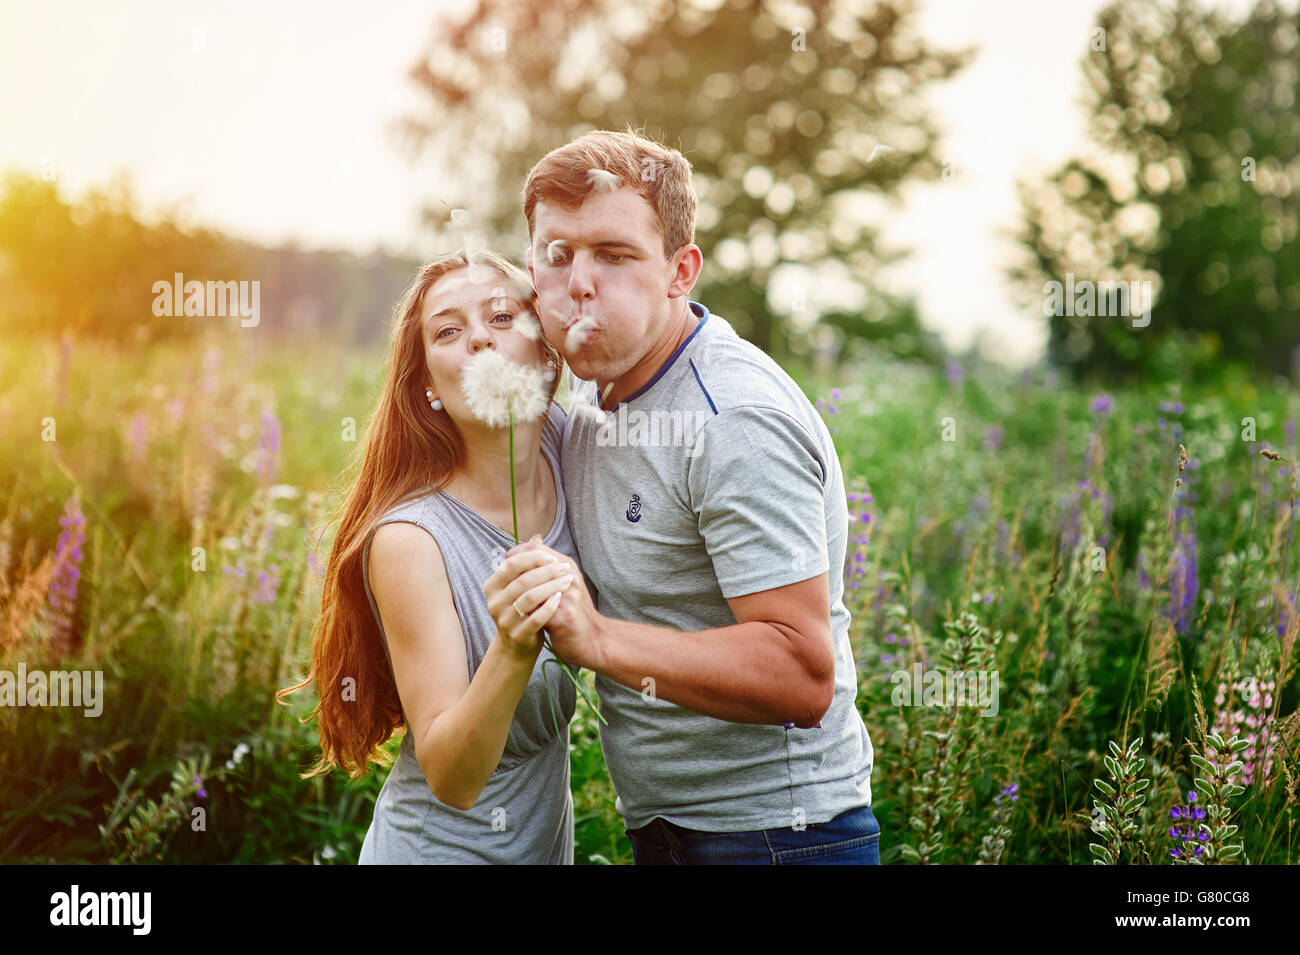 Young happy couple blowing together dandelions, outdoor in nature Stock Photo